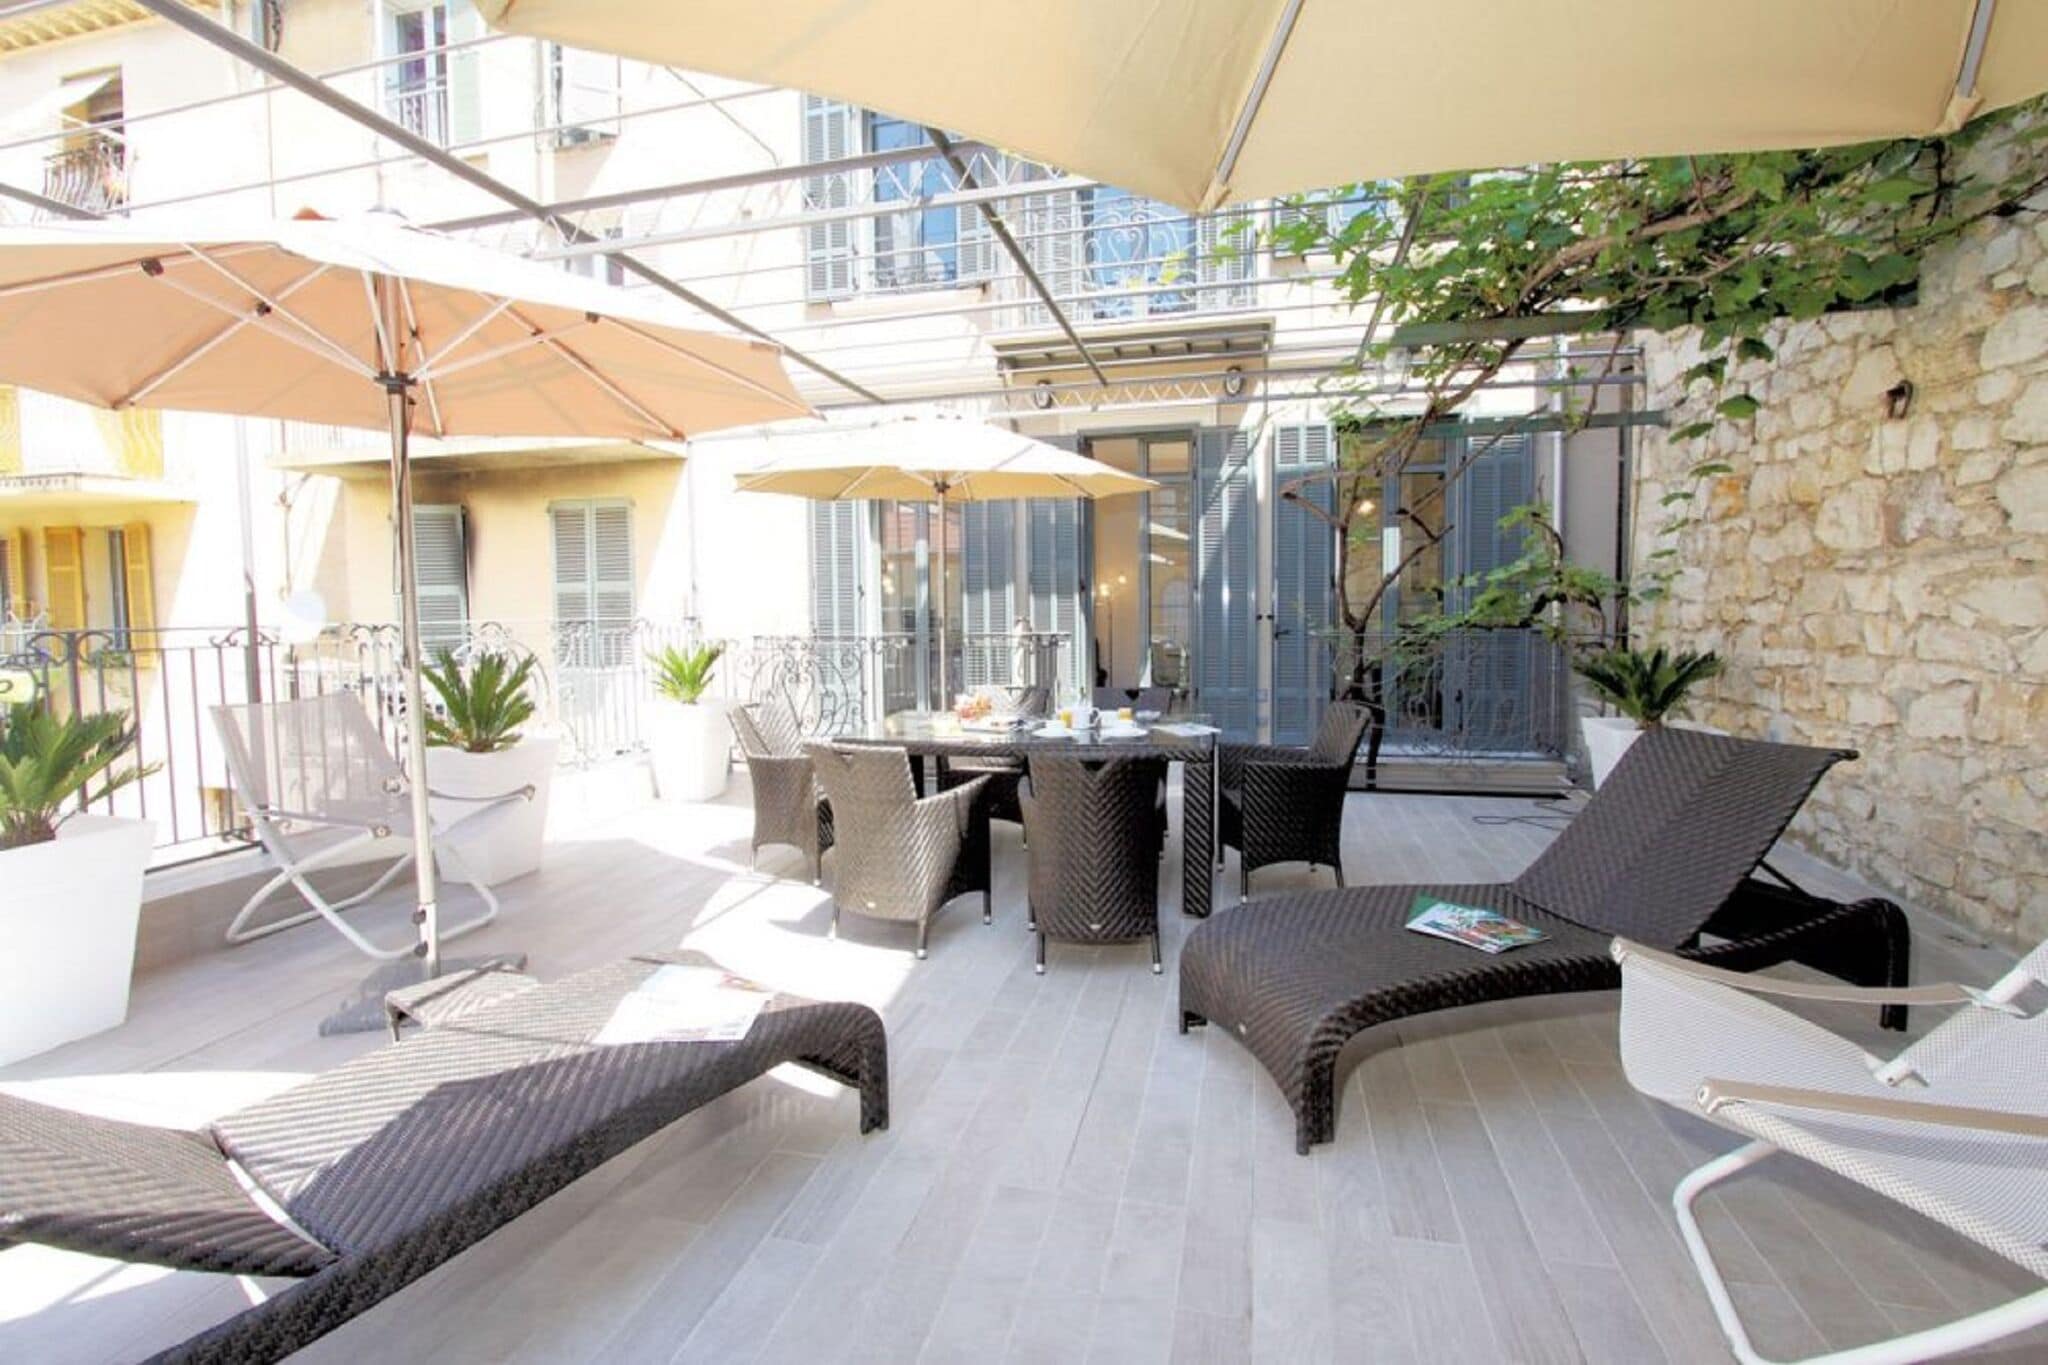 Luxurious apartment with terrace in the famous city of Cannes